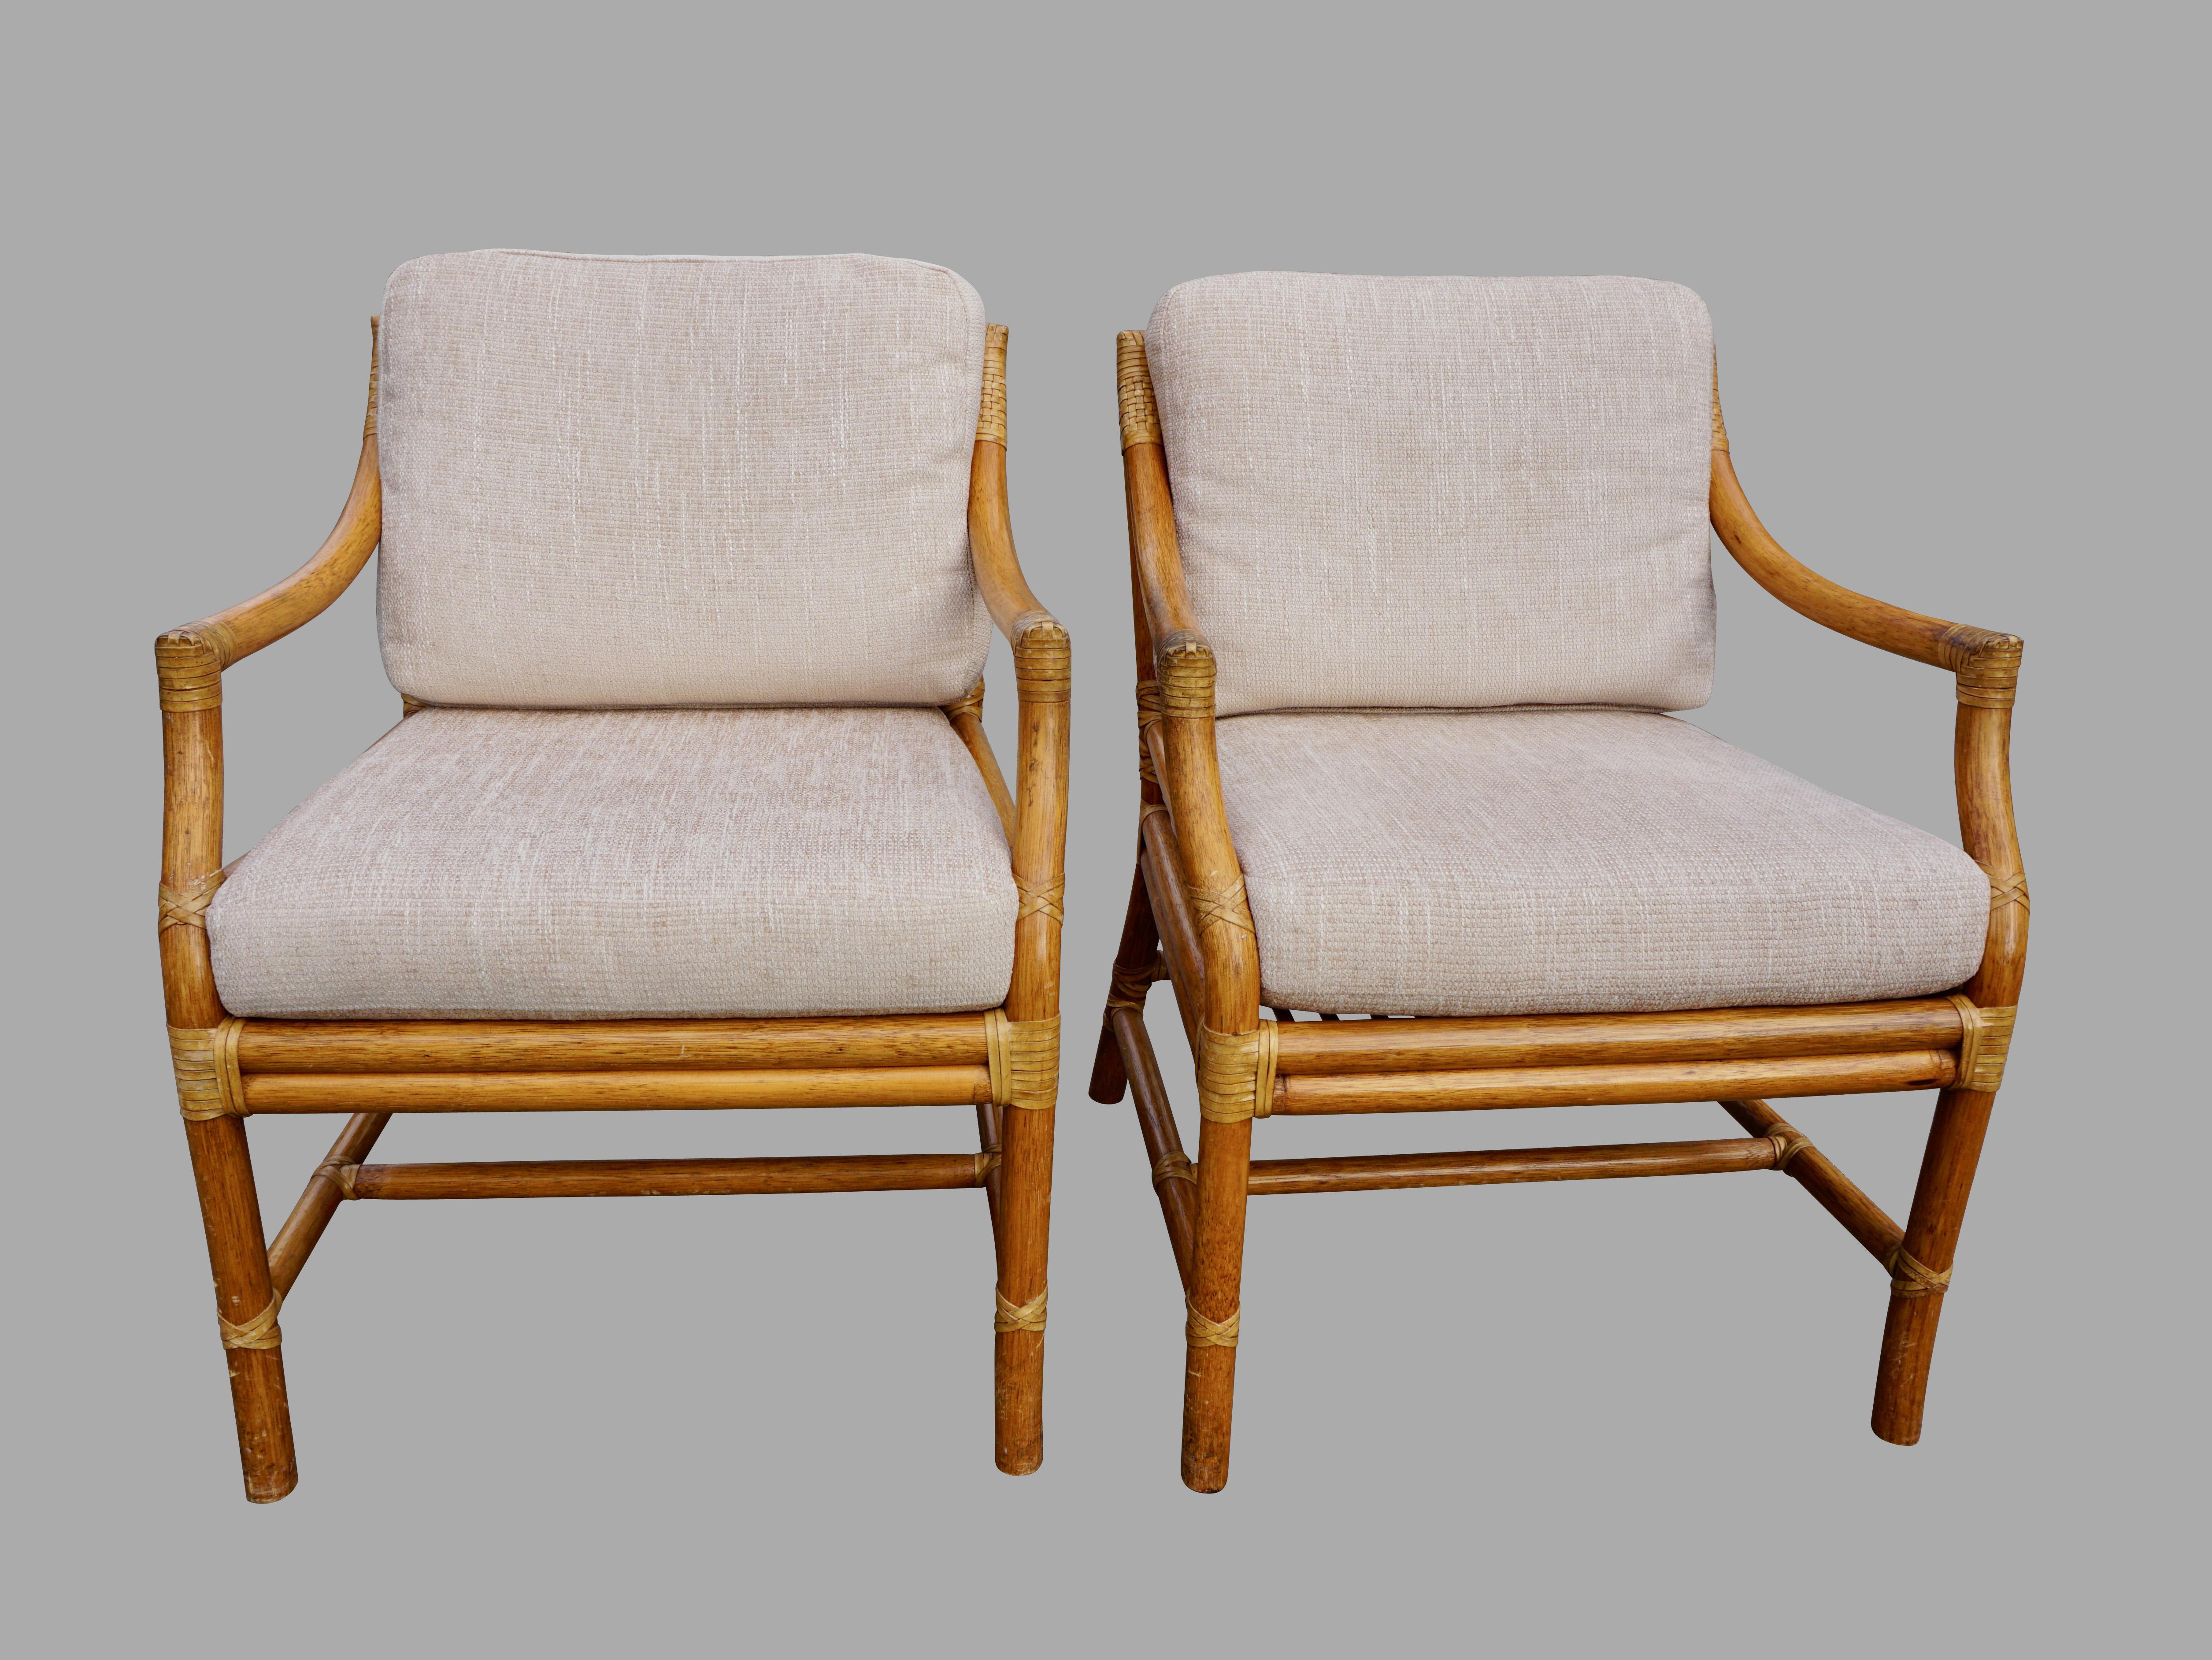 20th Century Pair of McGuire Organic Modern Rattan and Leather Upholstered Armchairs